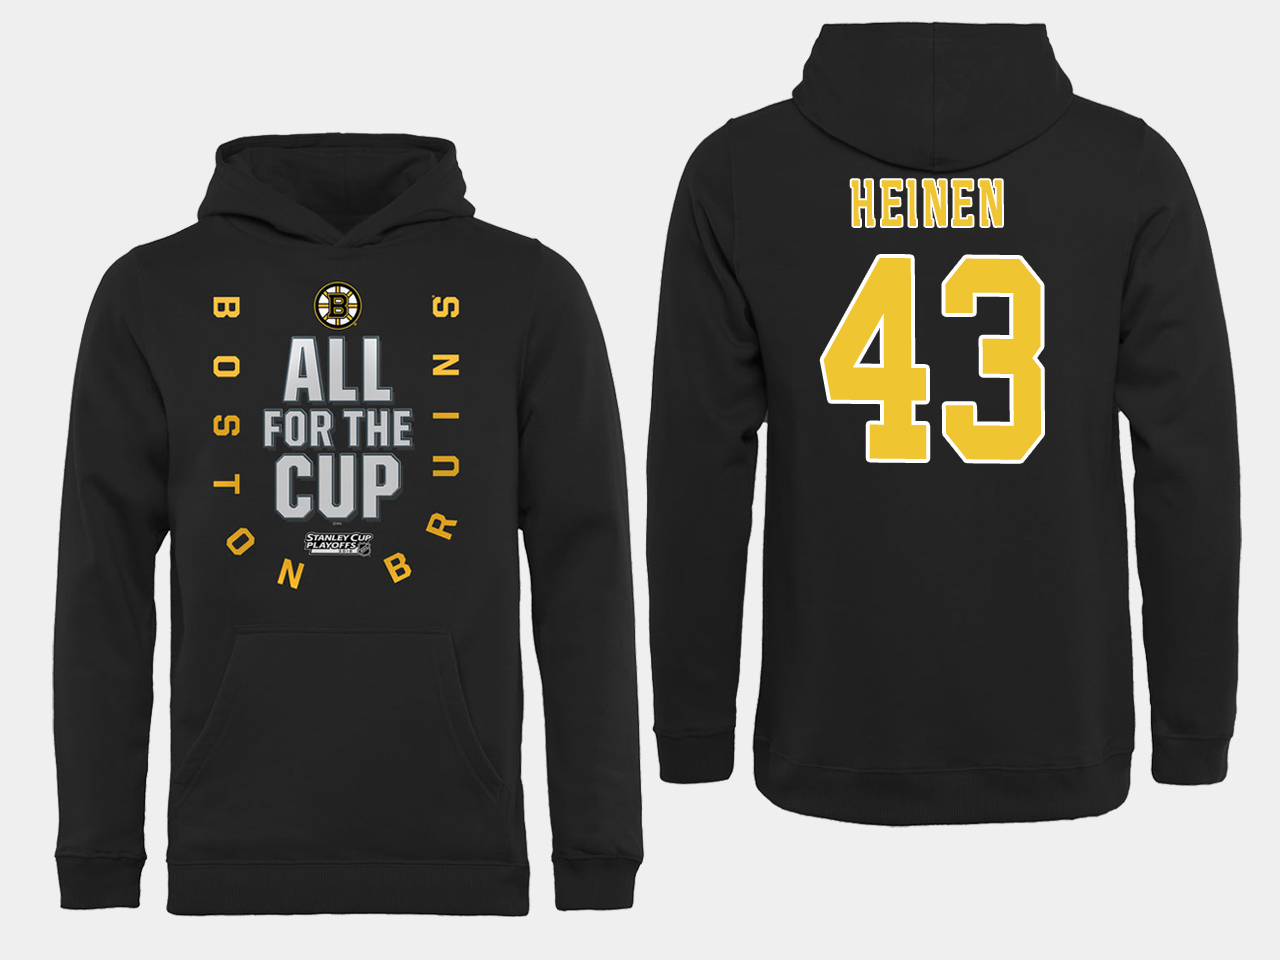 NHL Men Boston Bruins 43 Heinen Black All for the Cup Hoodie